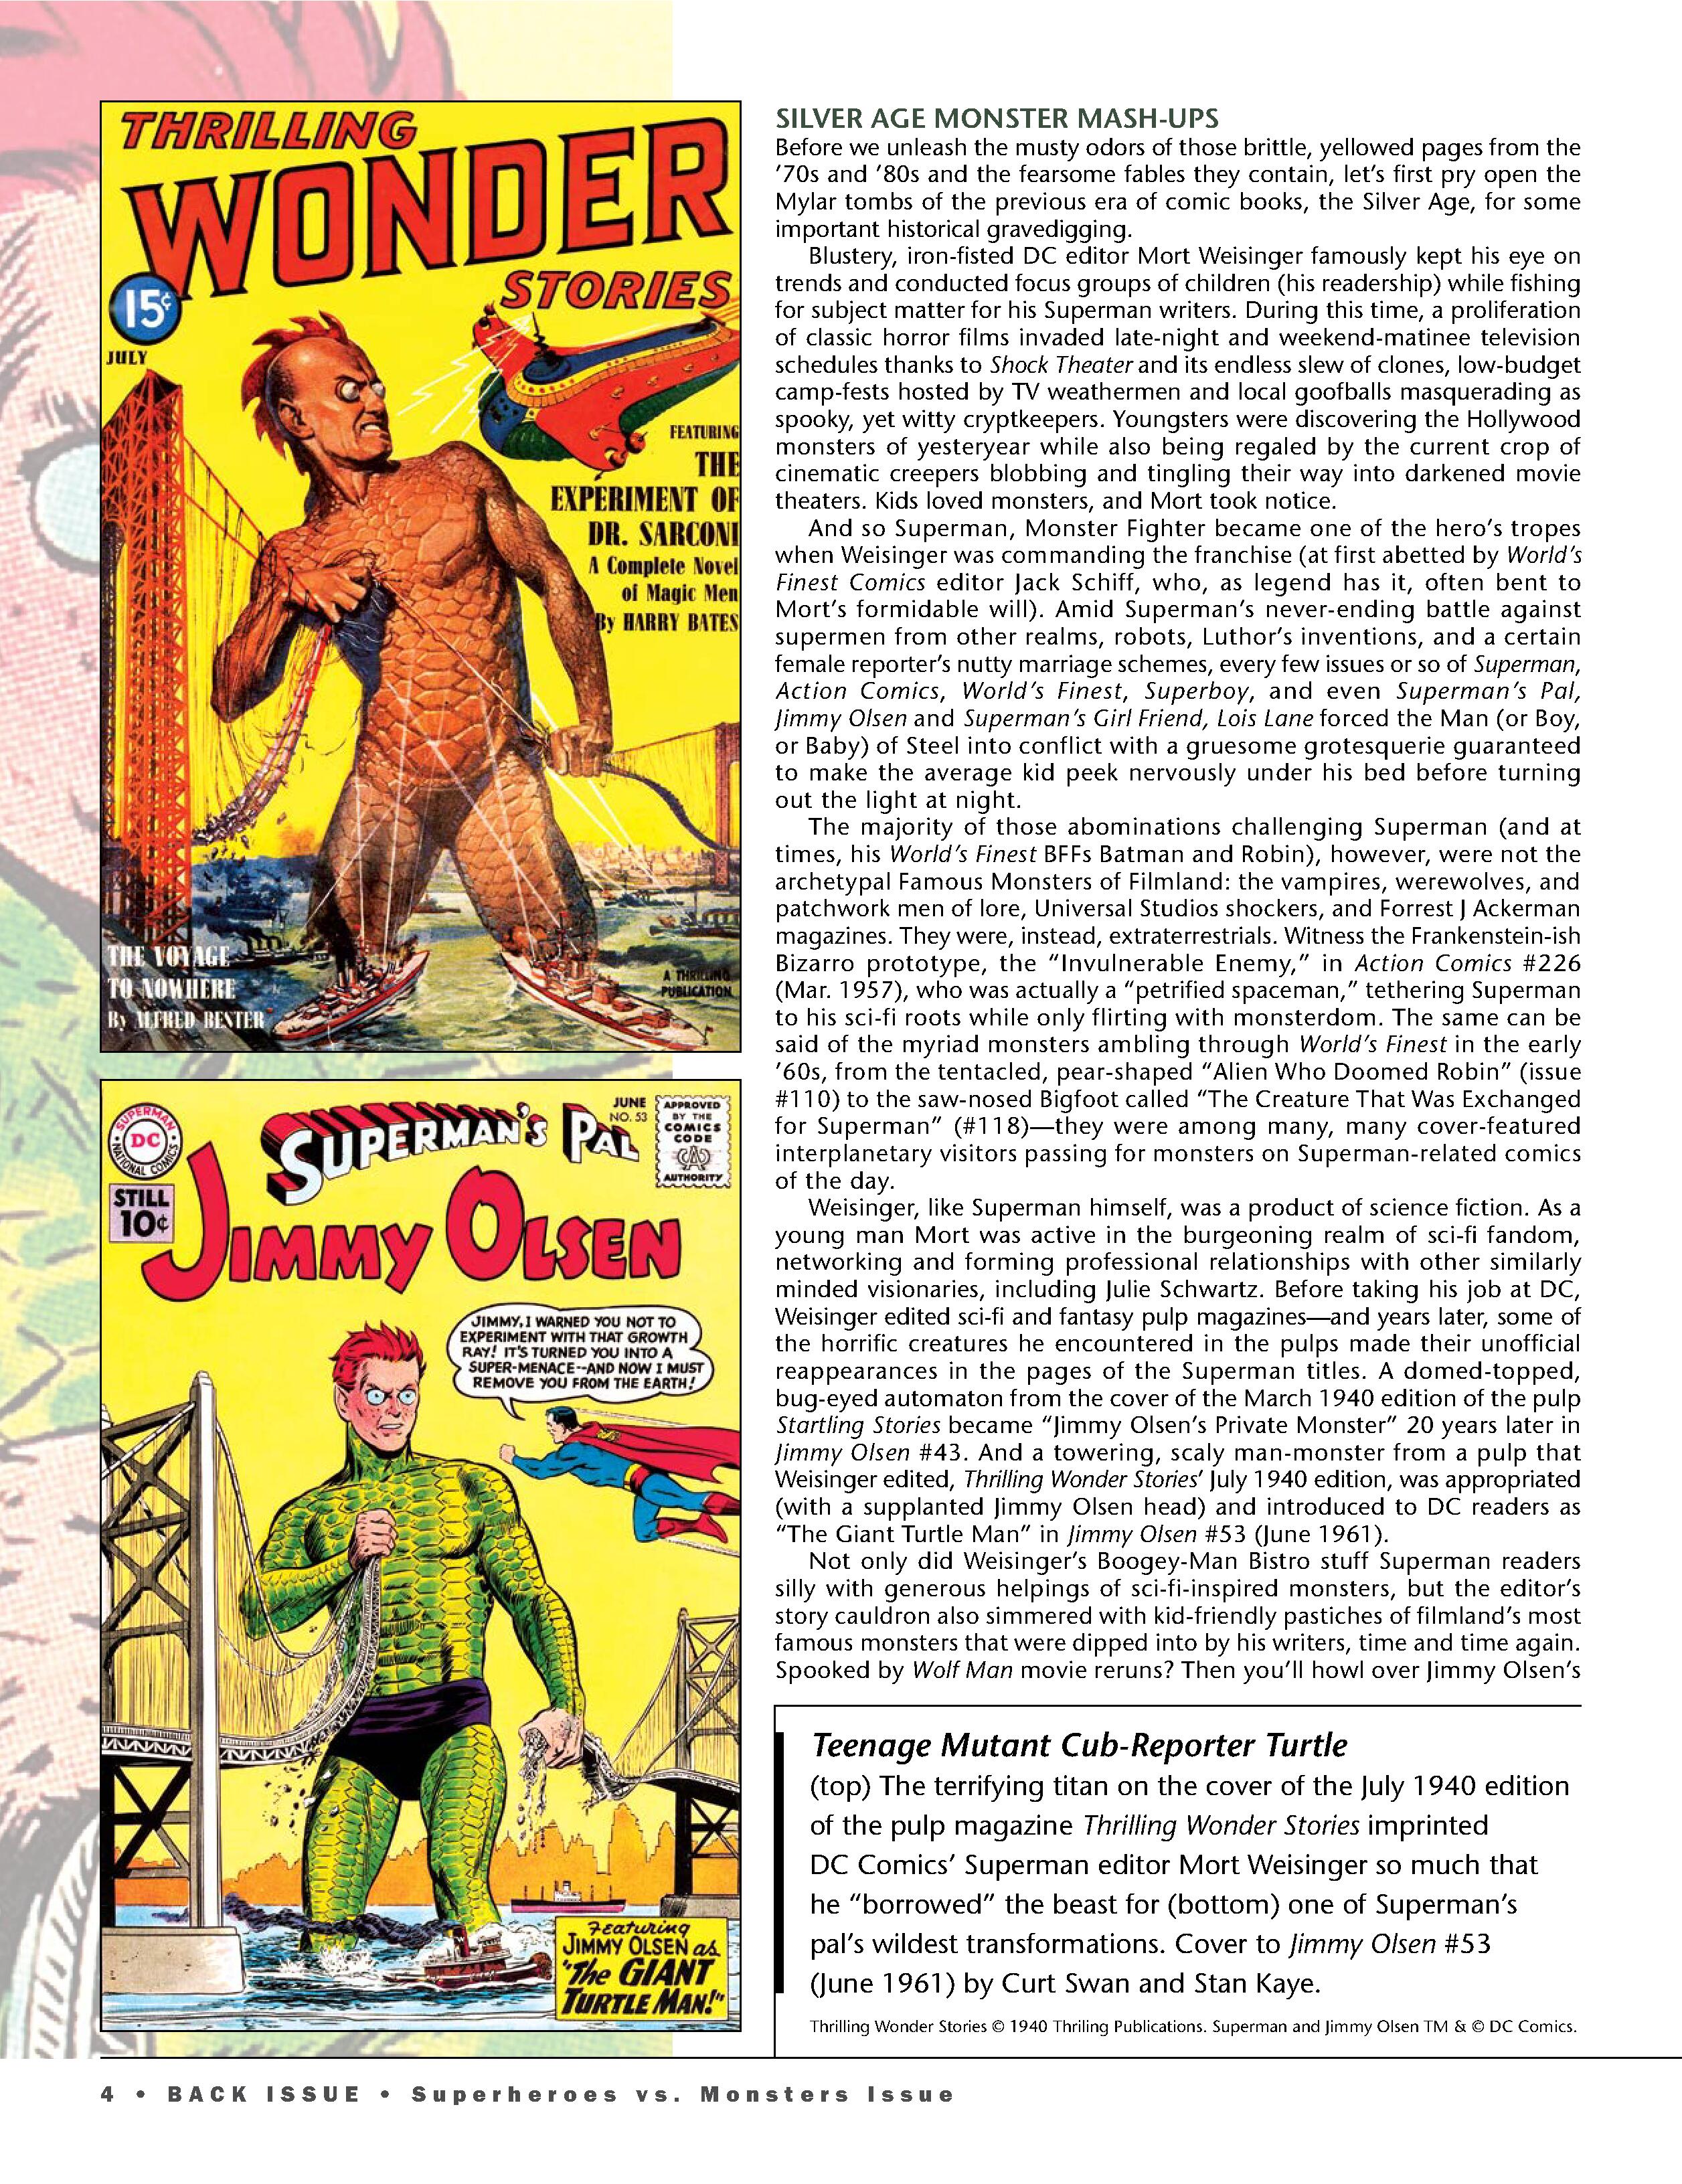 Read online Back Issue comic -  Issue #116 - 6